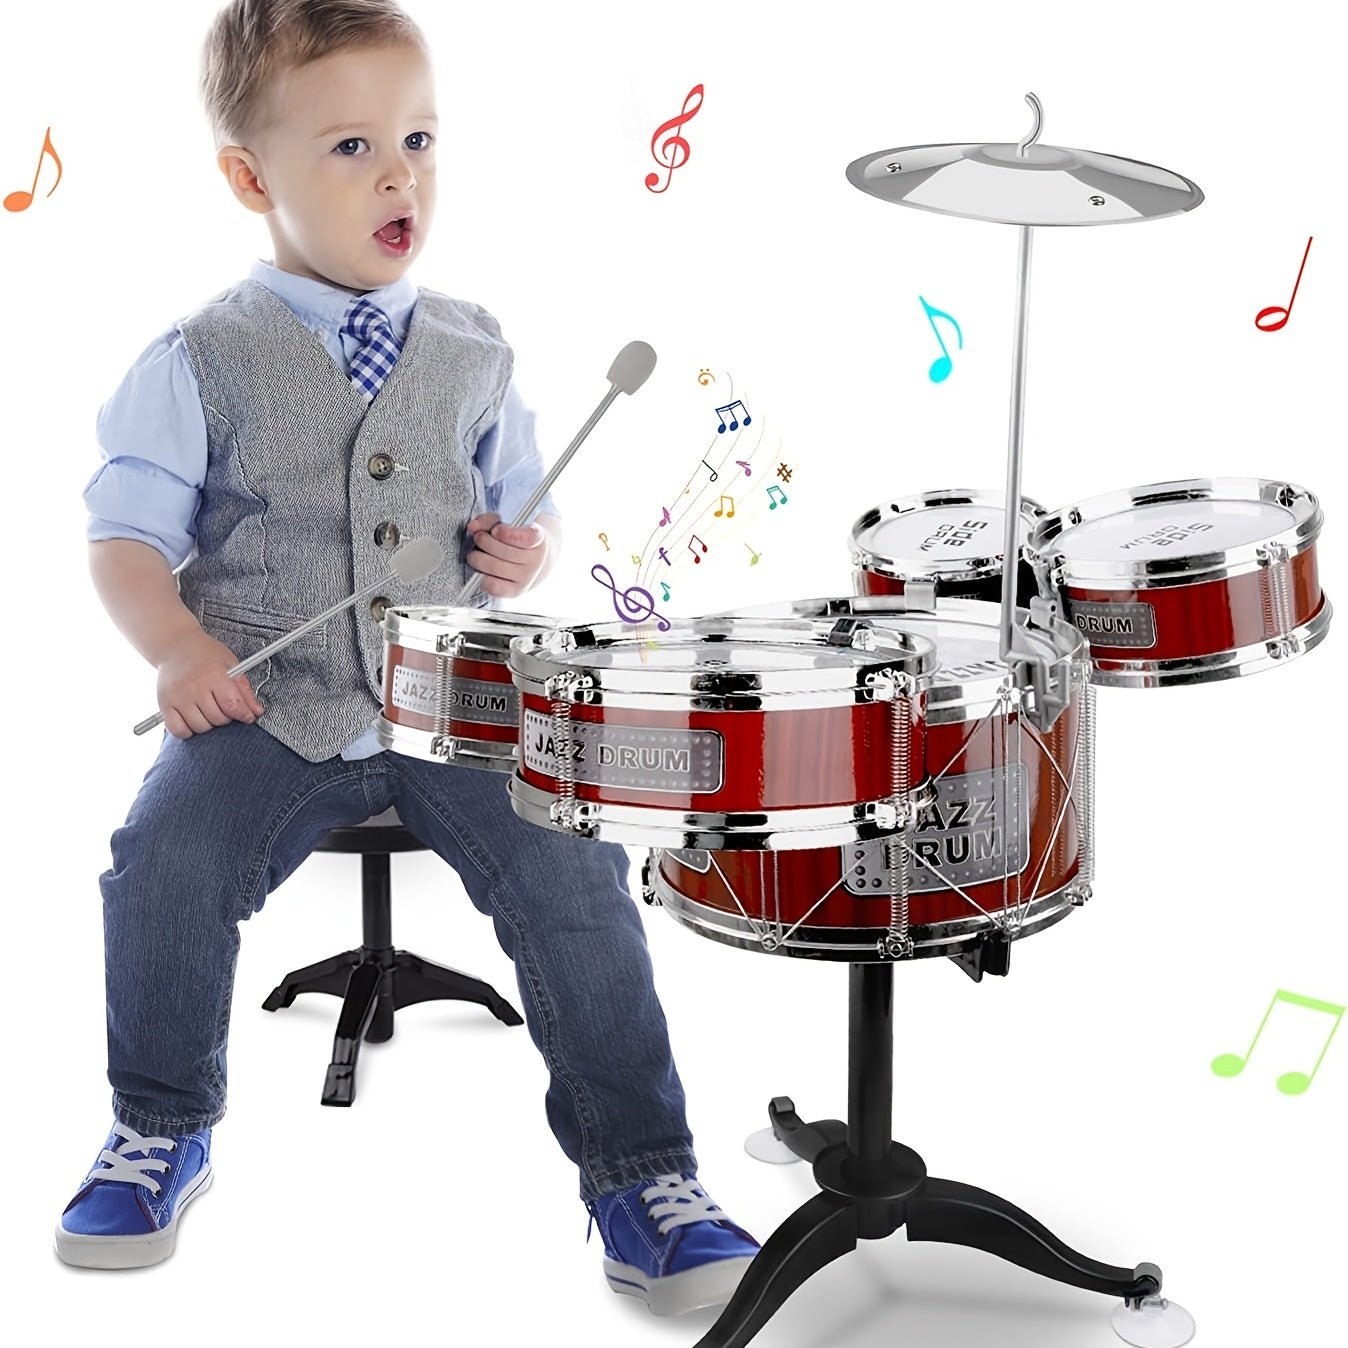 Kids Drum Set Musical Toy Drum Kit For Toddlers, Jazz Drum Set With 1 Stool, 2 Drum Sticks, 1 Cymbal And 5 Drums Musical Instruments